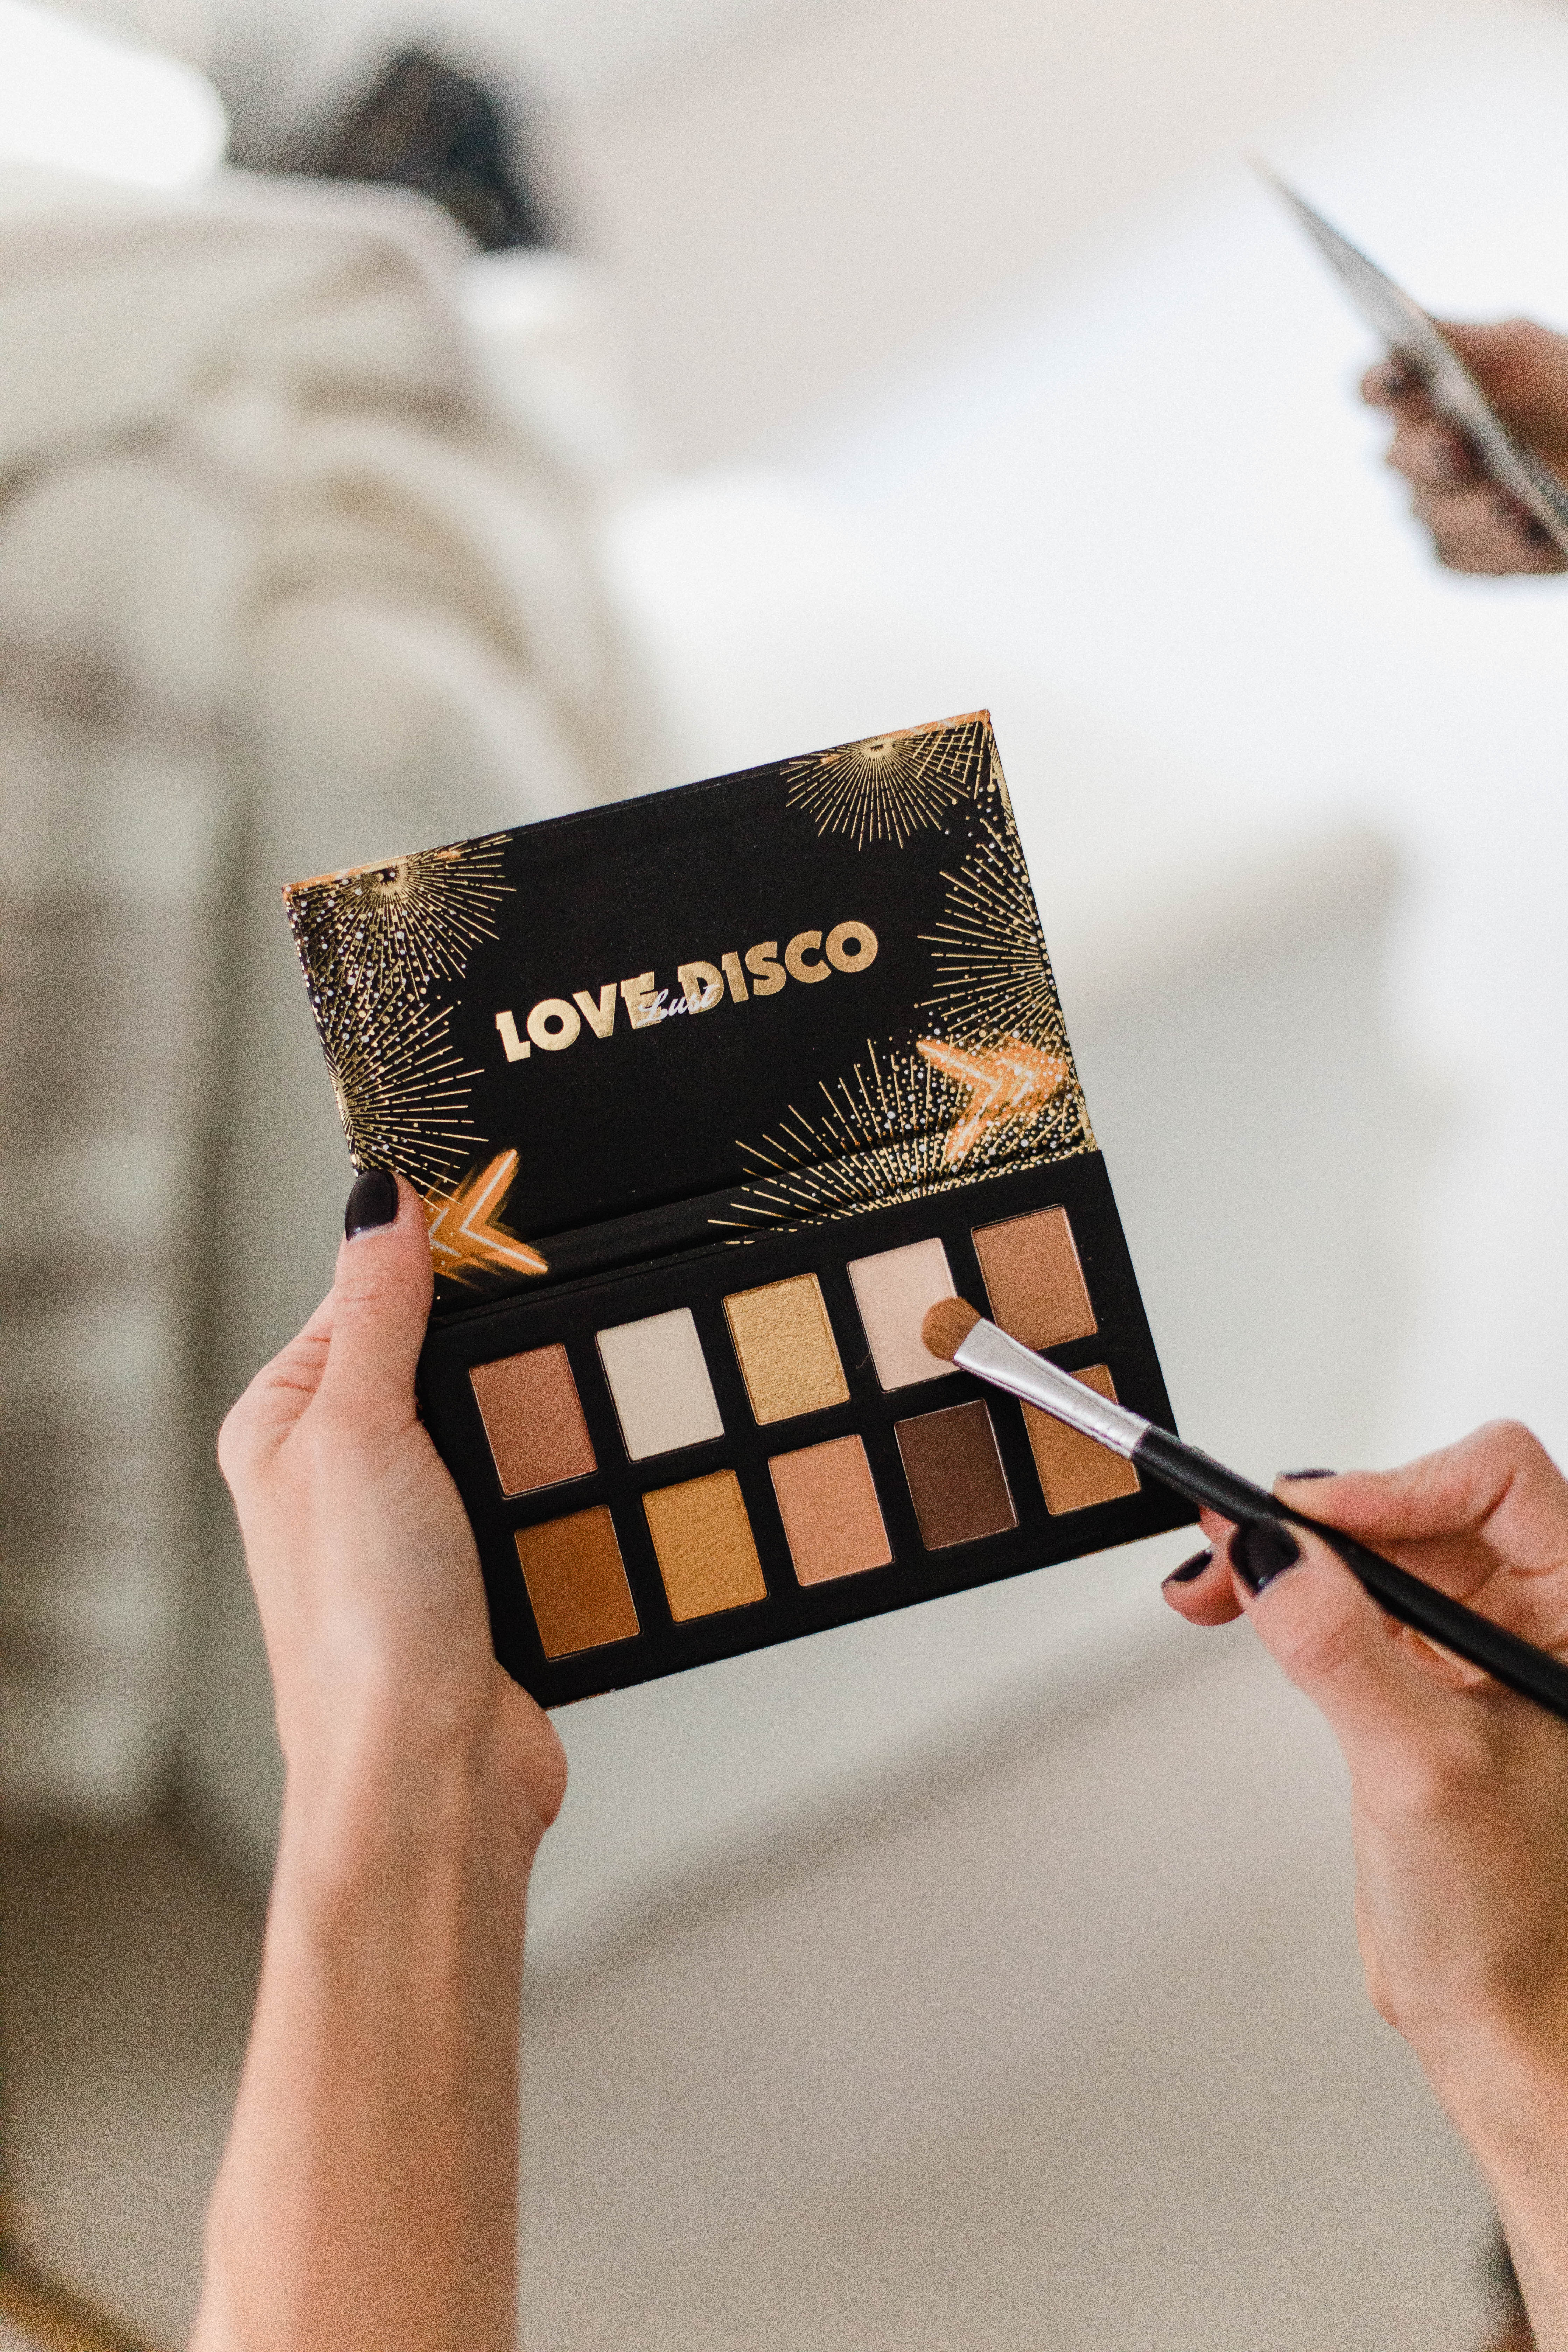 Connecticut life and style blogger Lauren McBride shares an affordable fall eyeshadow palette, featuring 10 shadows for only $20.